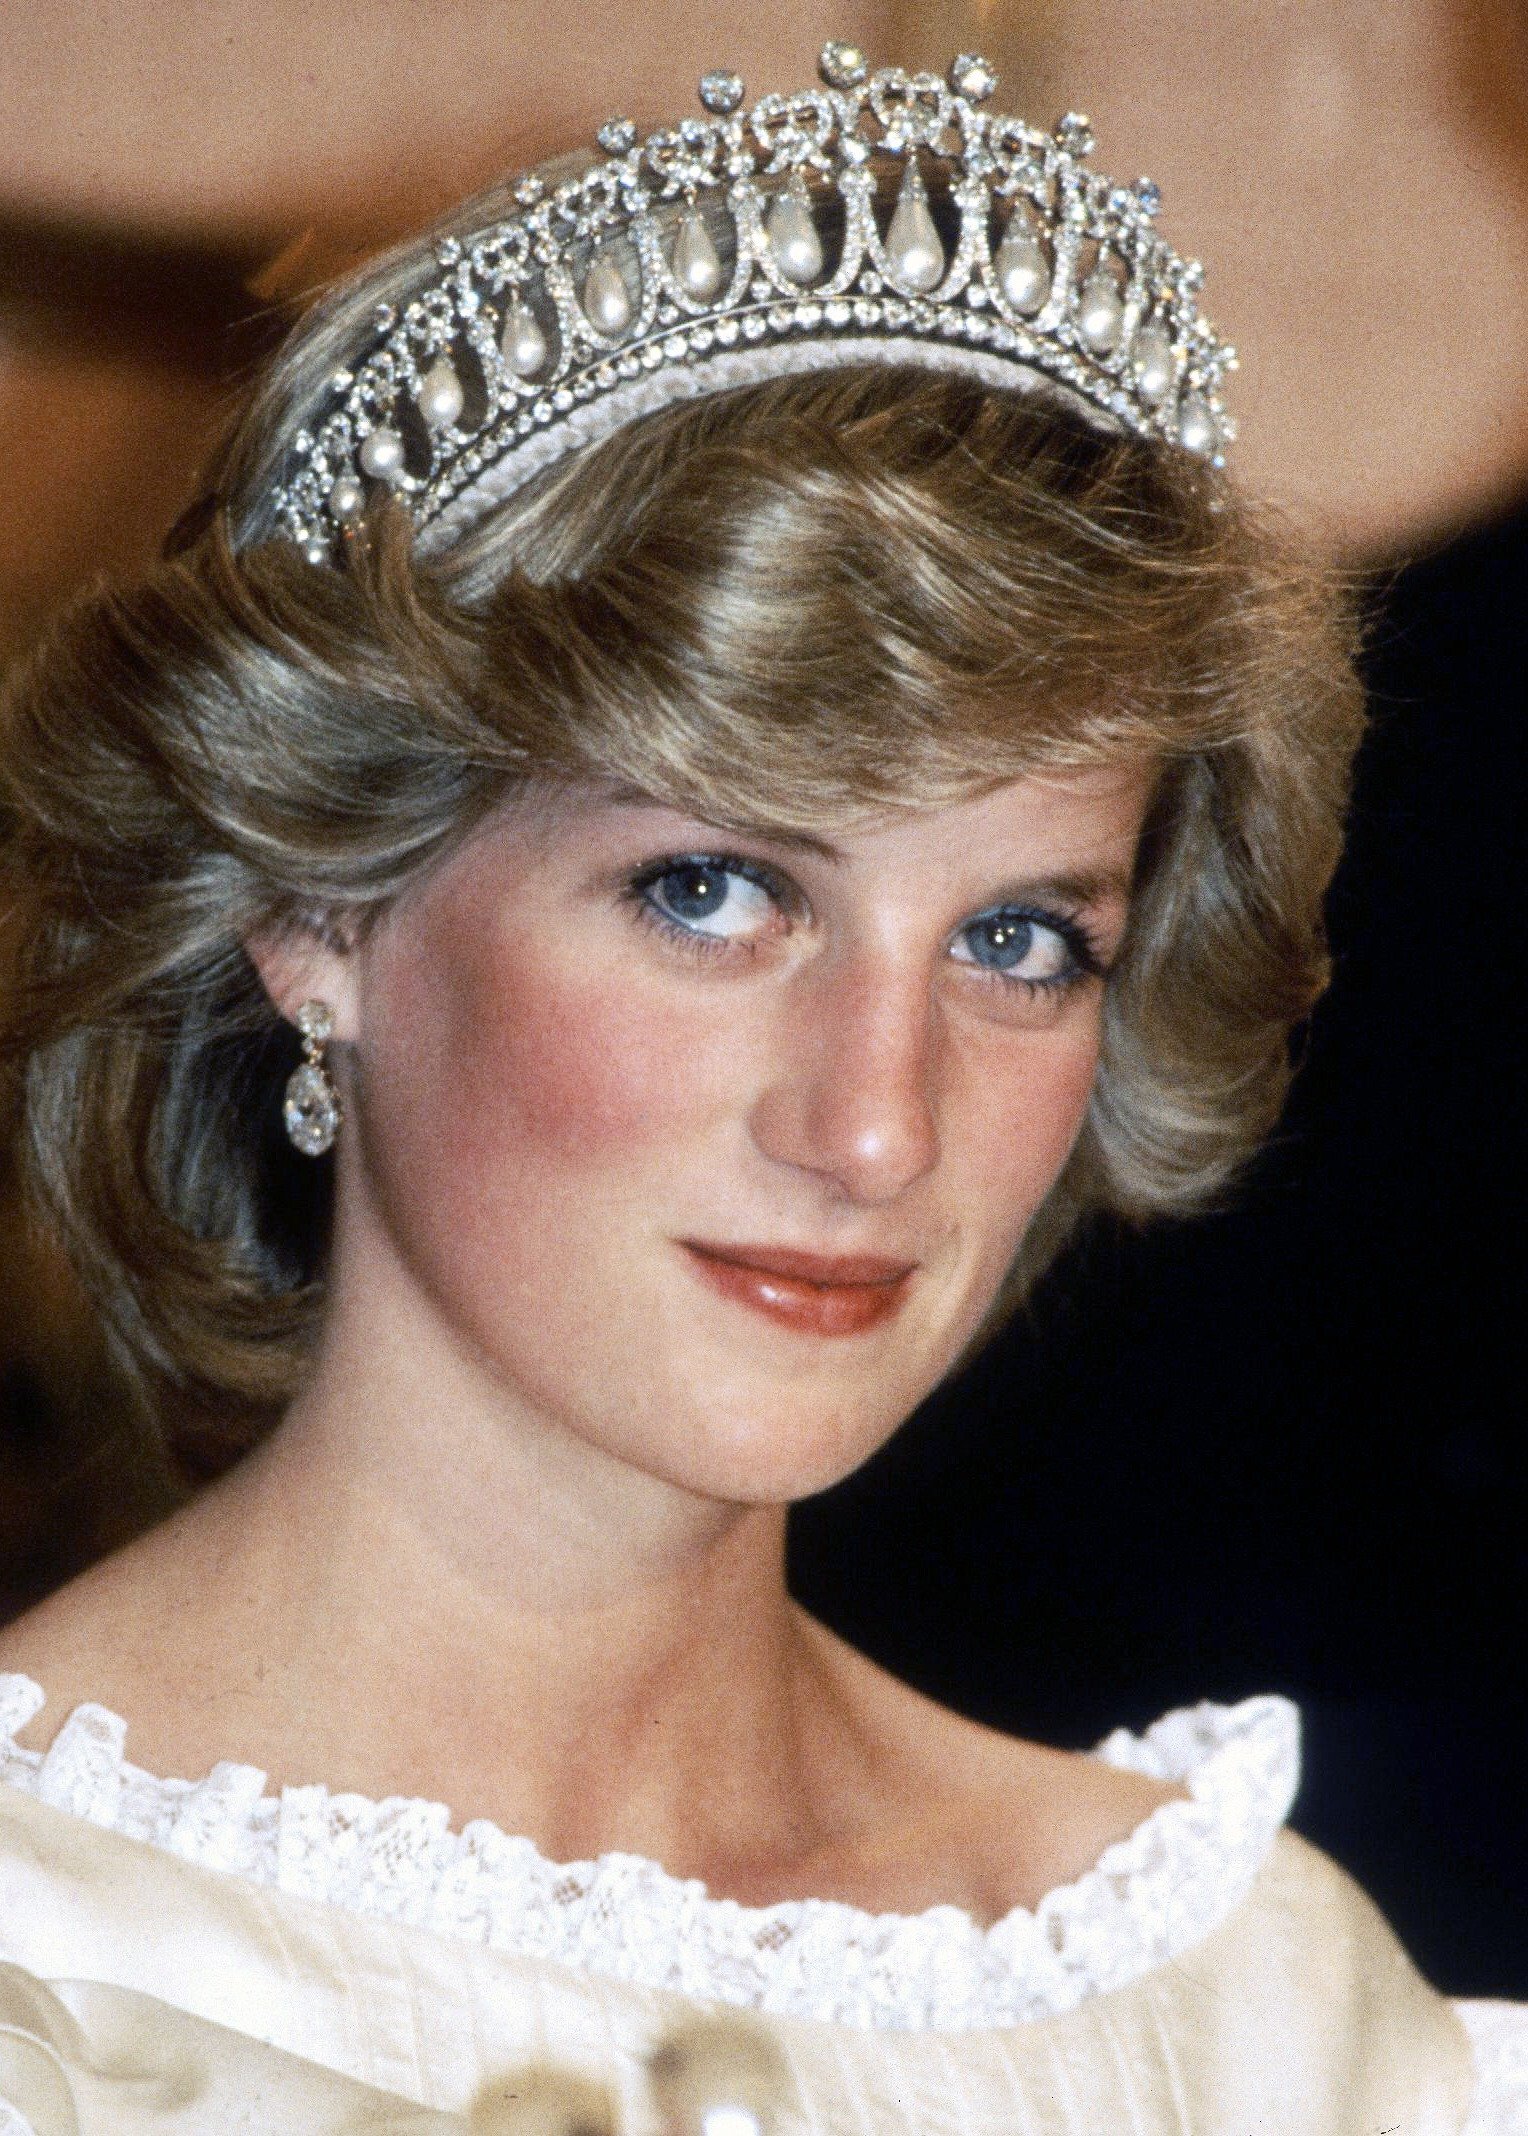 Diana, Princess of Wales attends a banquet on April 29, 1983 in Auckland, New Zealand ┃Source: Getty Images